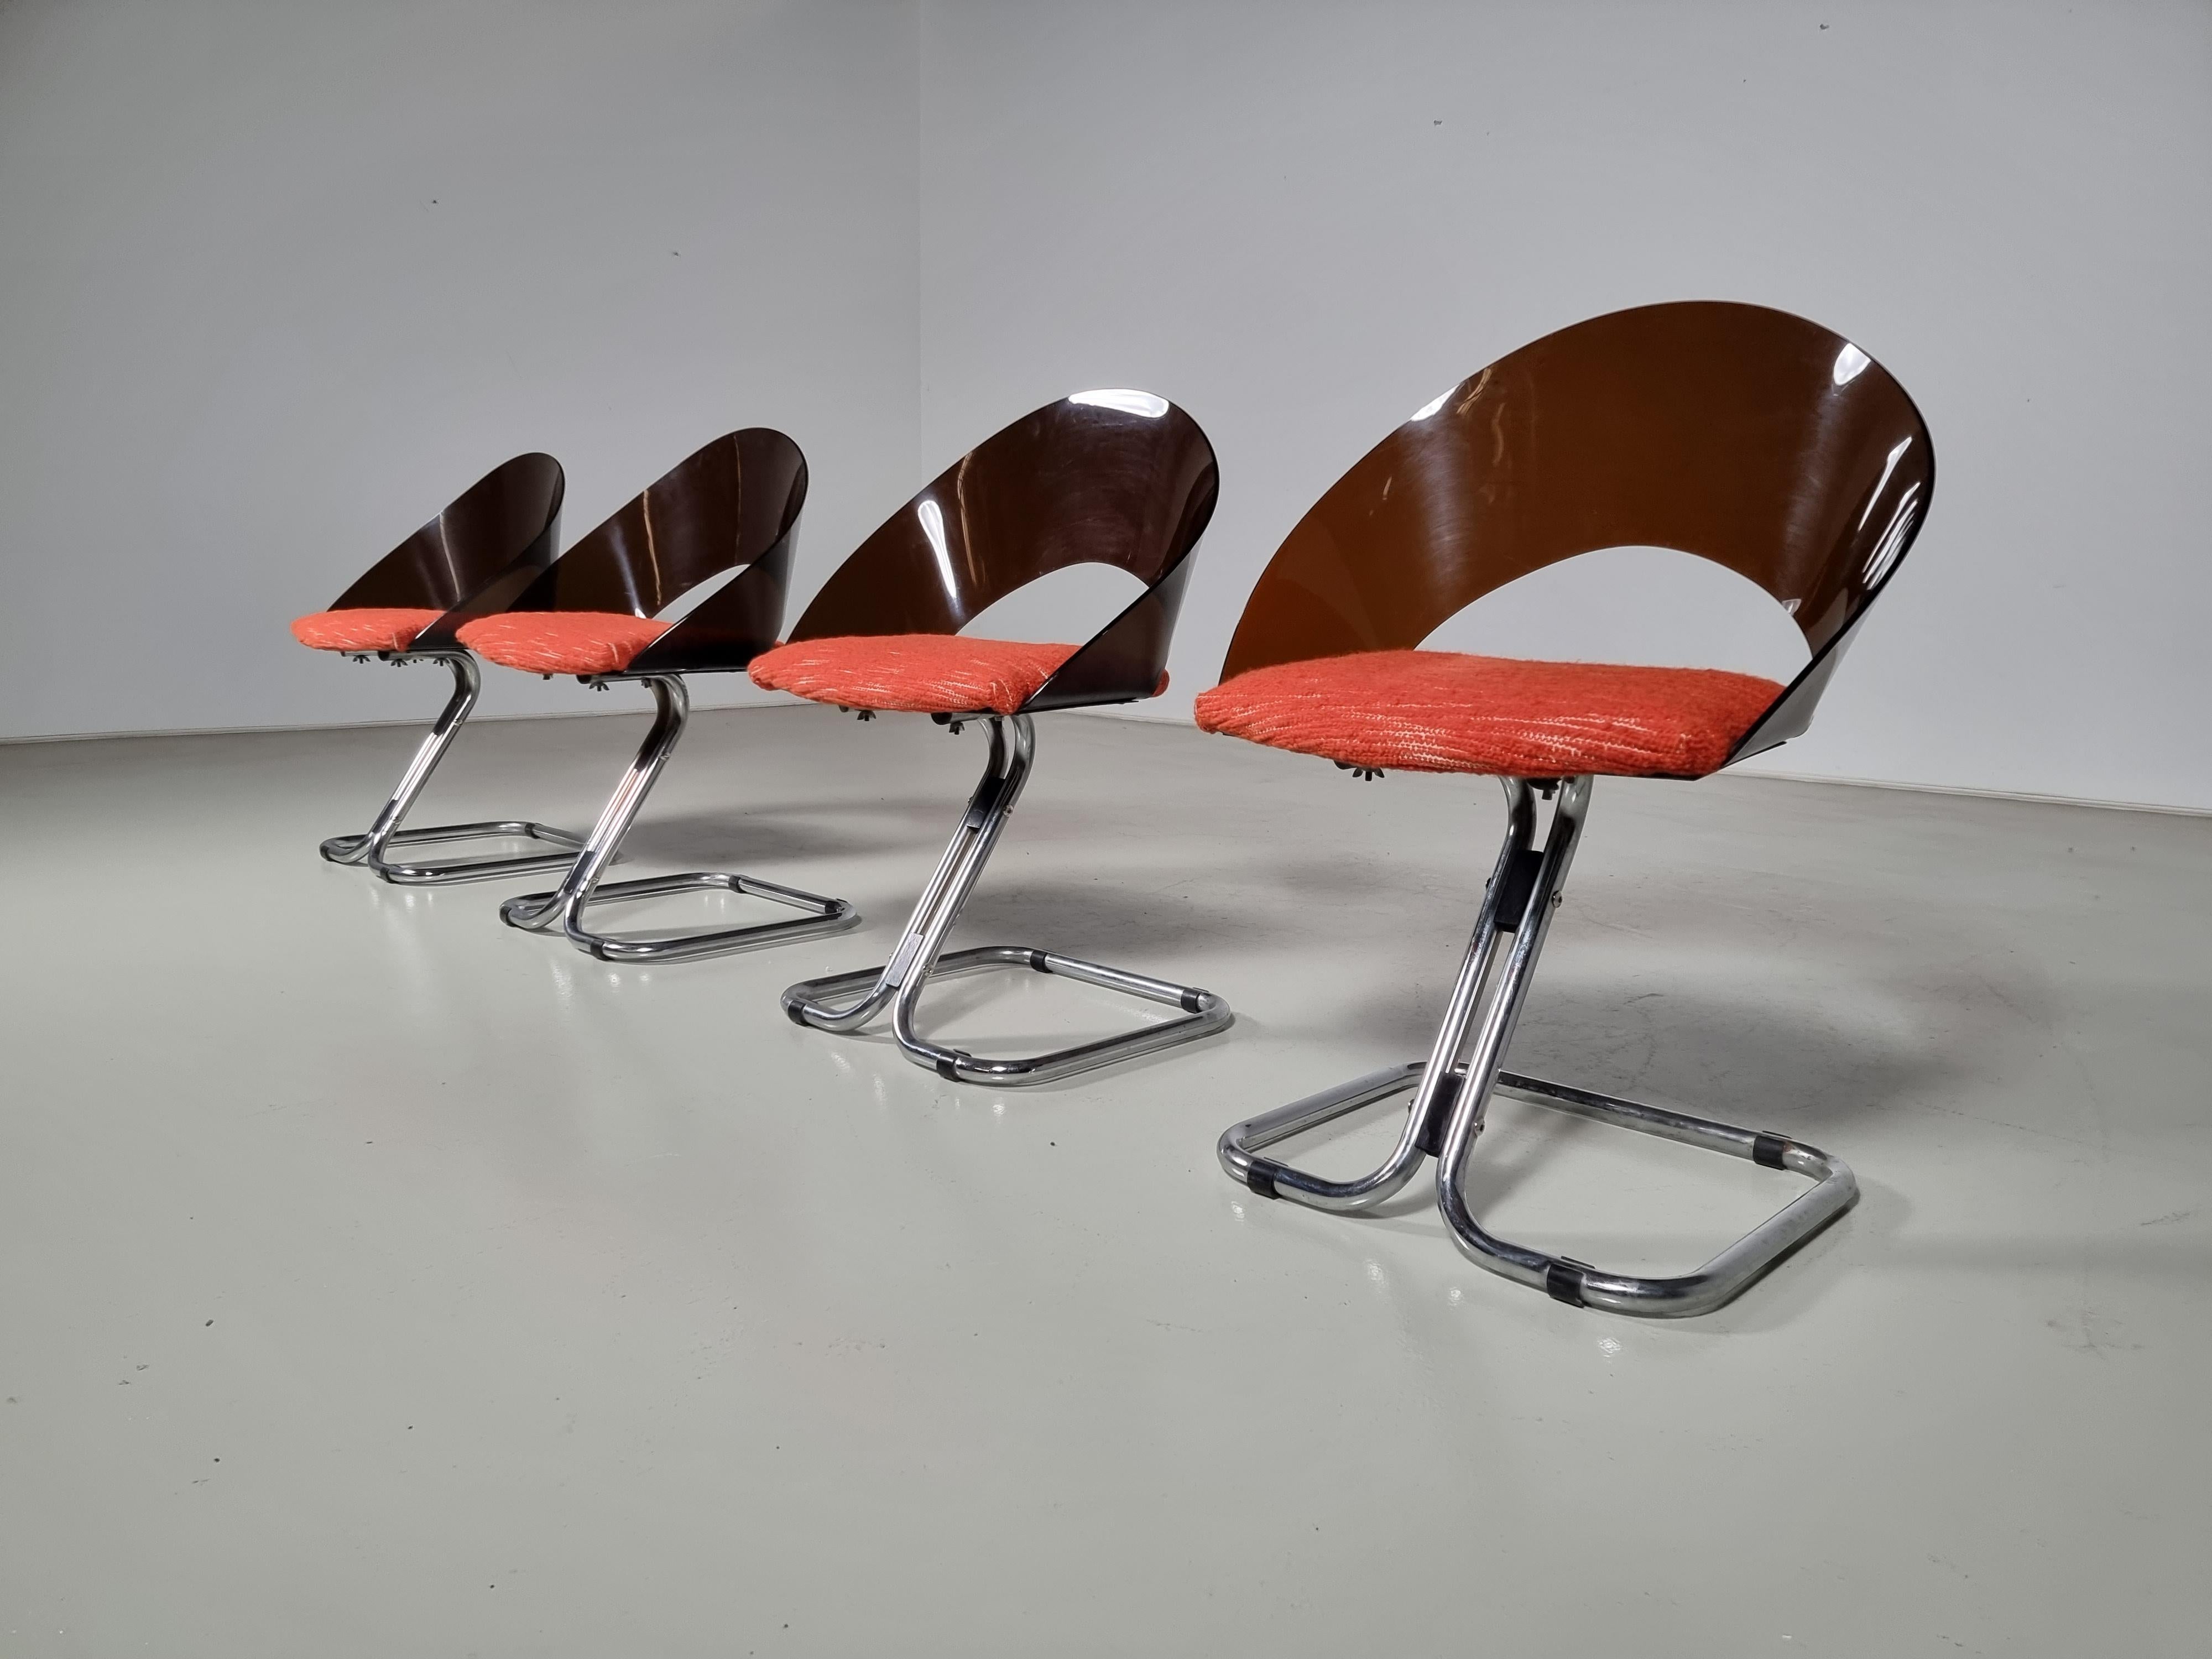 Midcentury space-age design dining chairs from the 1970s. Featuring a chromed tubular base with smoked plexiglass backrests, and new upholstered orange fabric cushions. Fabric by La Maison Pierre Frey.

